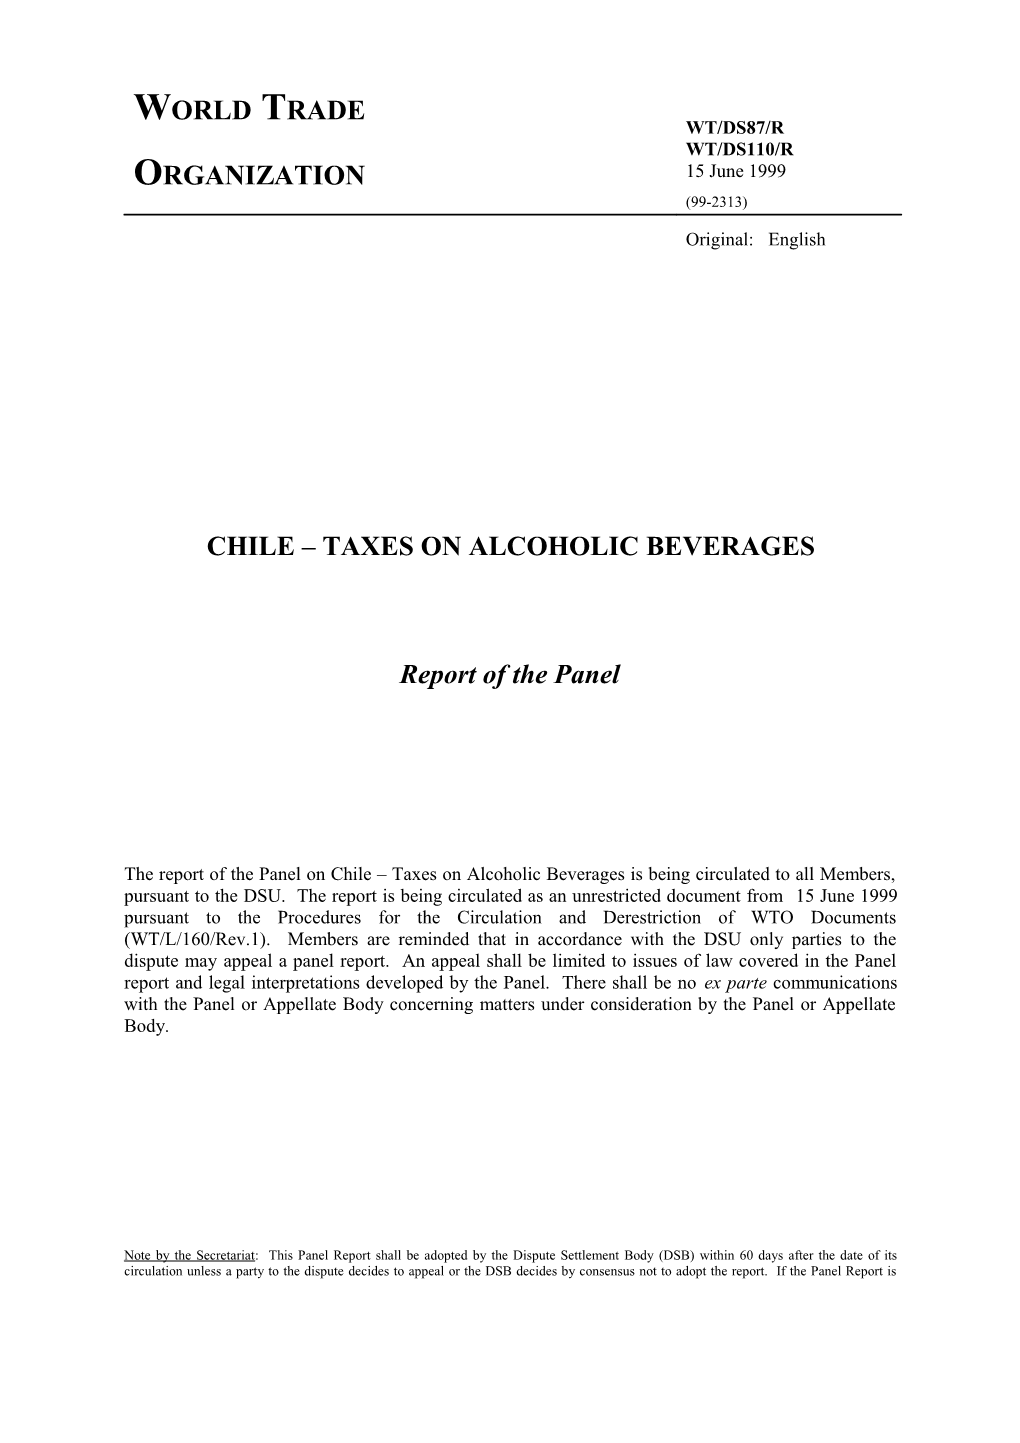 Chile Taxes on Alcoholic Beverages